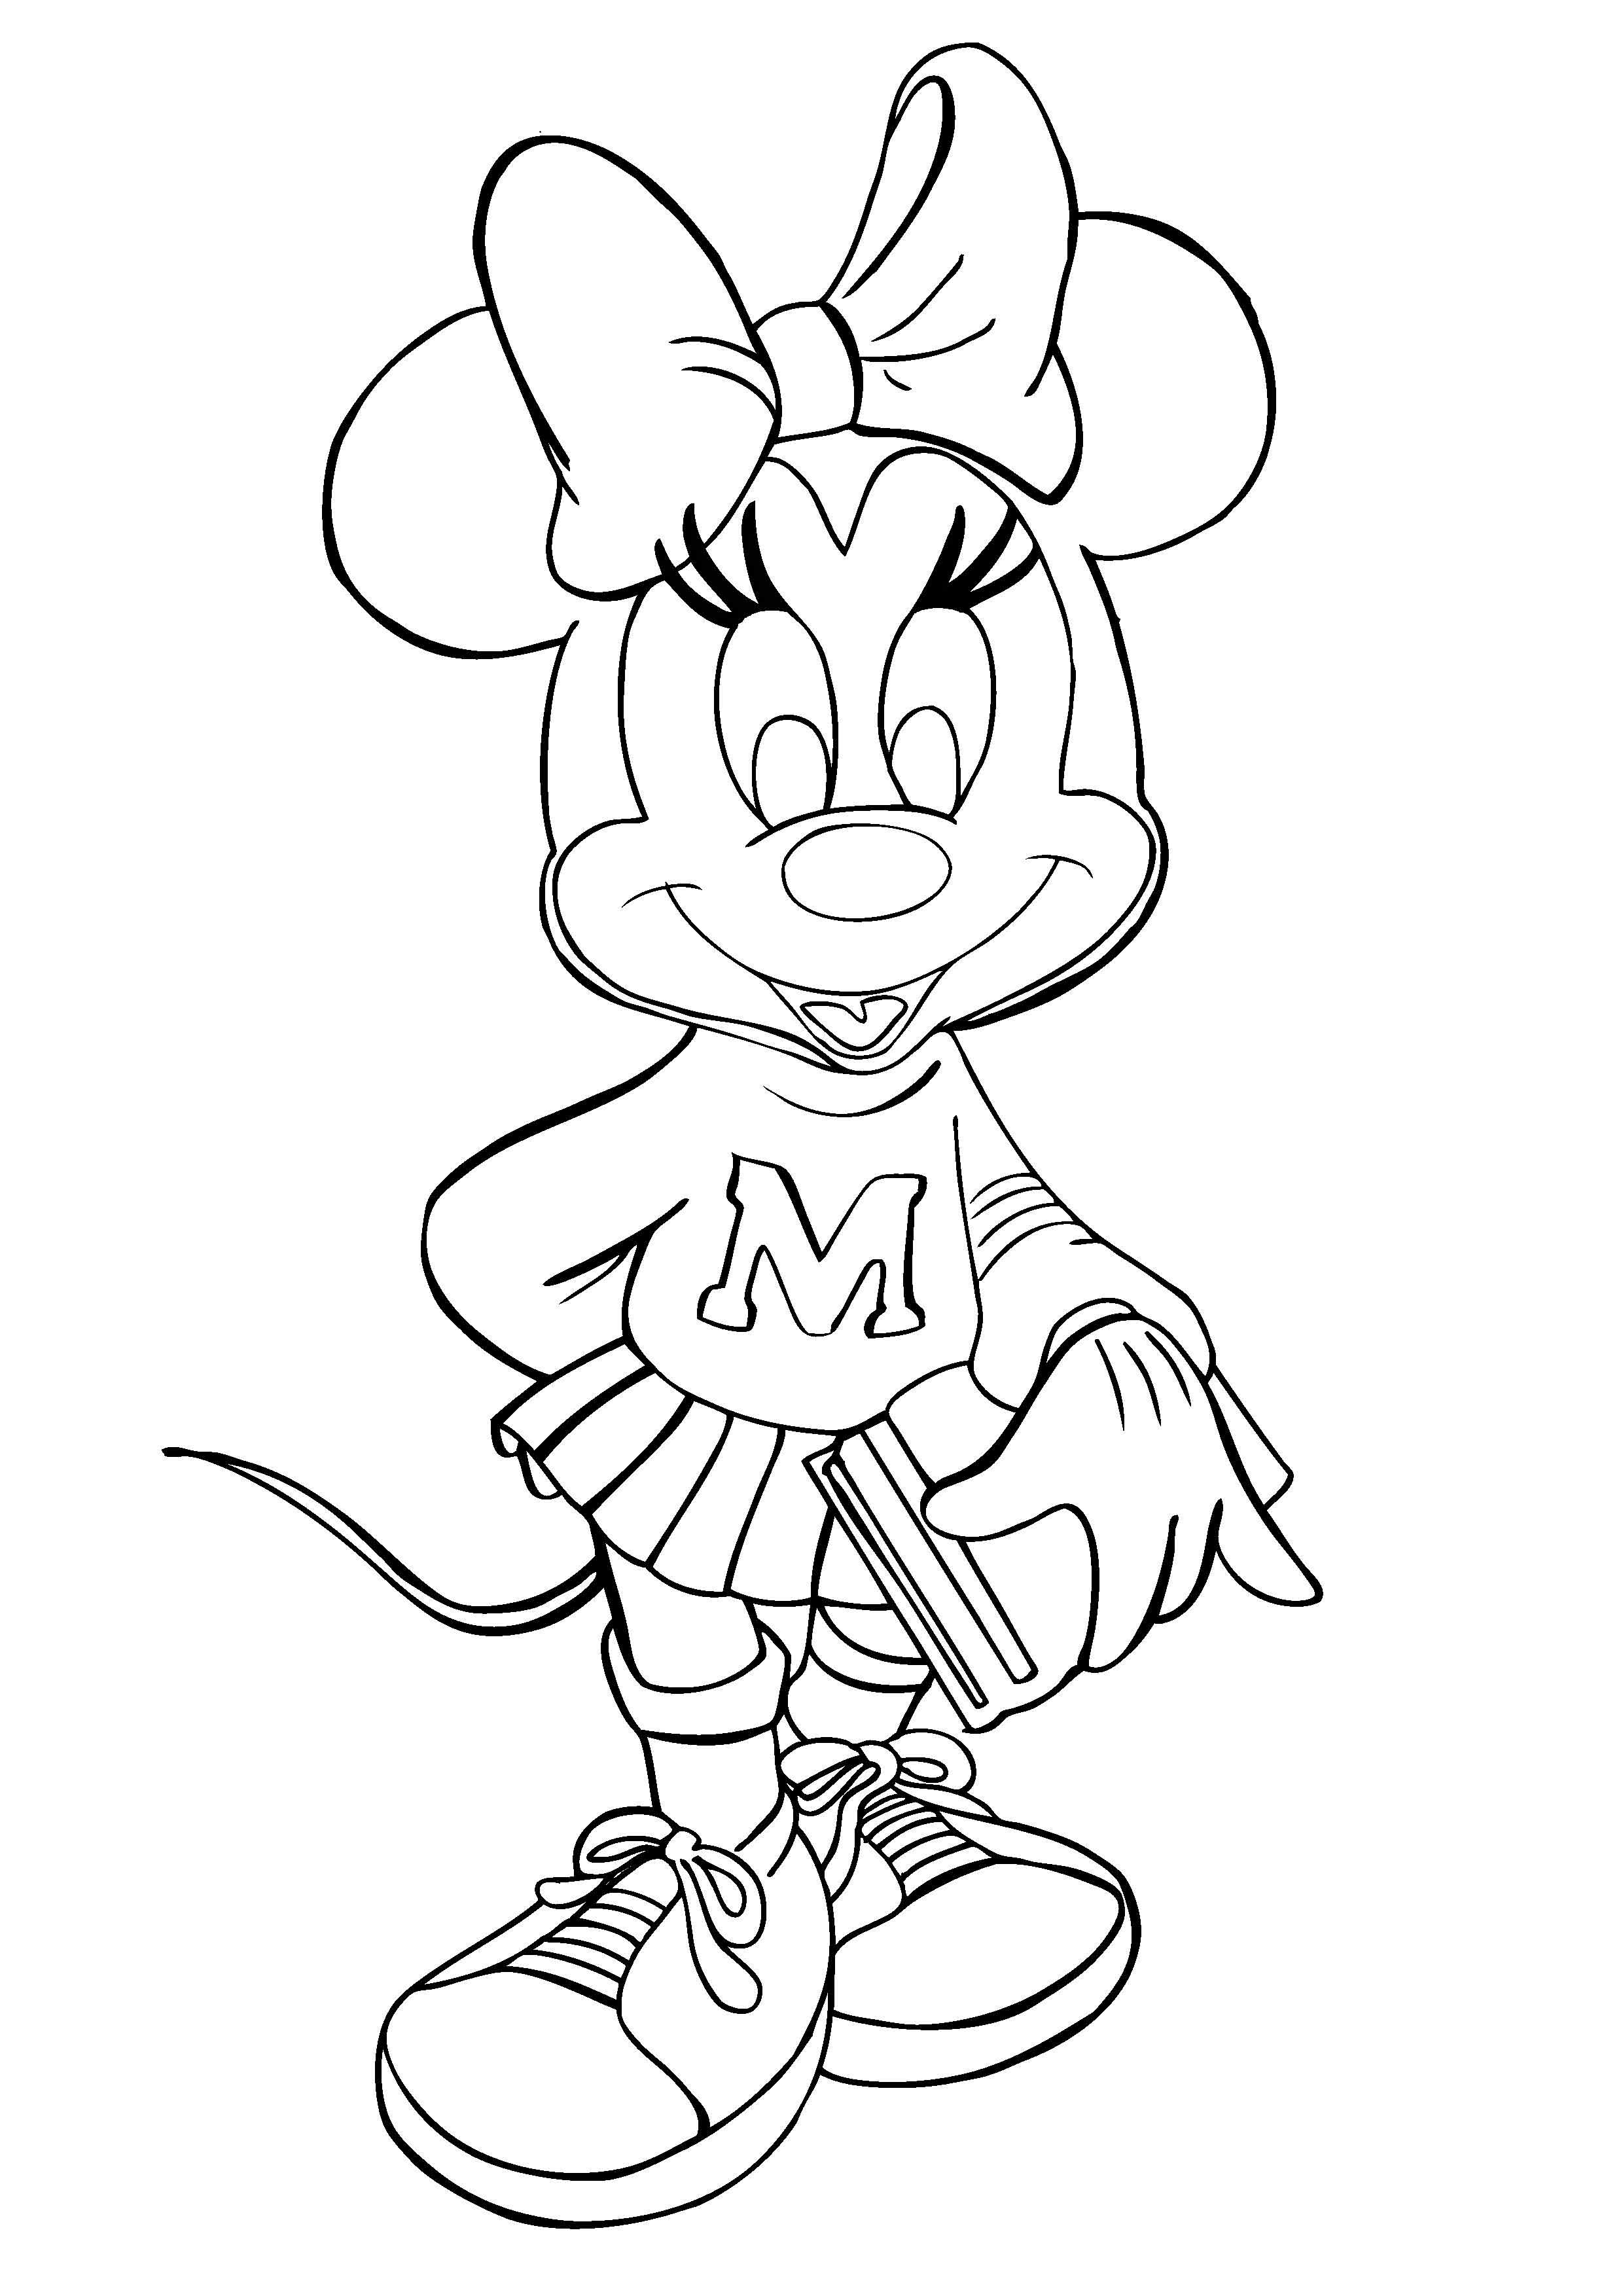 Sweet Minnie Mouse Coloring Page